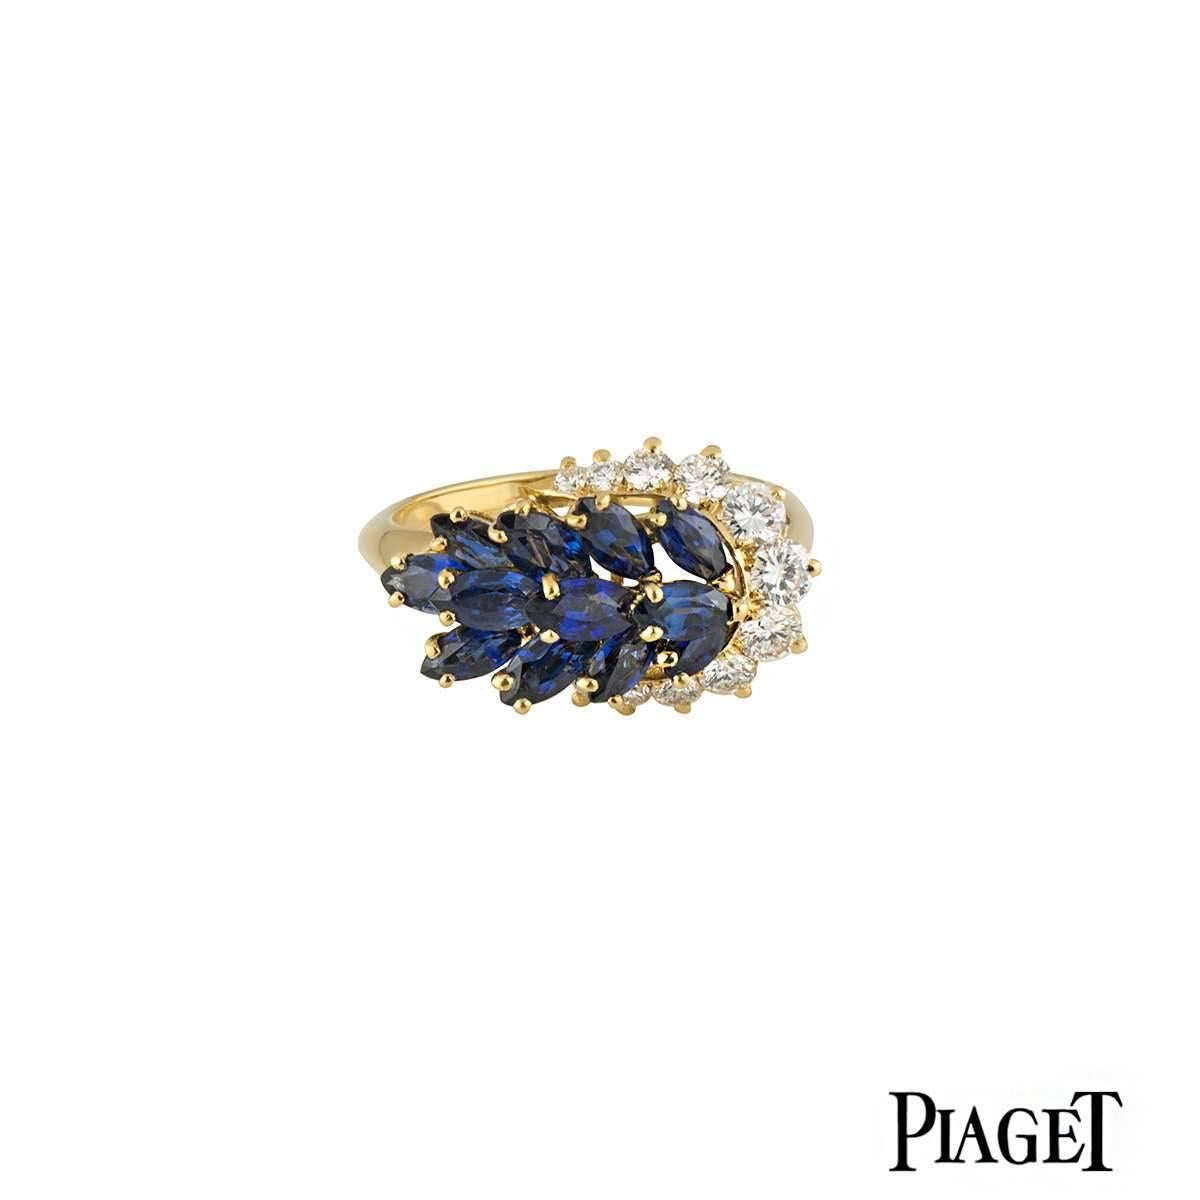 A stylish 18k yellow gold Piaget diamond and sapphire ring. The ring comprises of 12 marquise cut sapphires with in a claw setting complimented by 11 round brilliant cut diamonds graduating around one size of the ring. The sapphires have a total